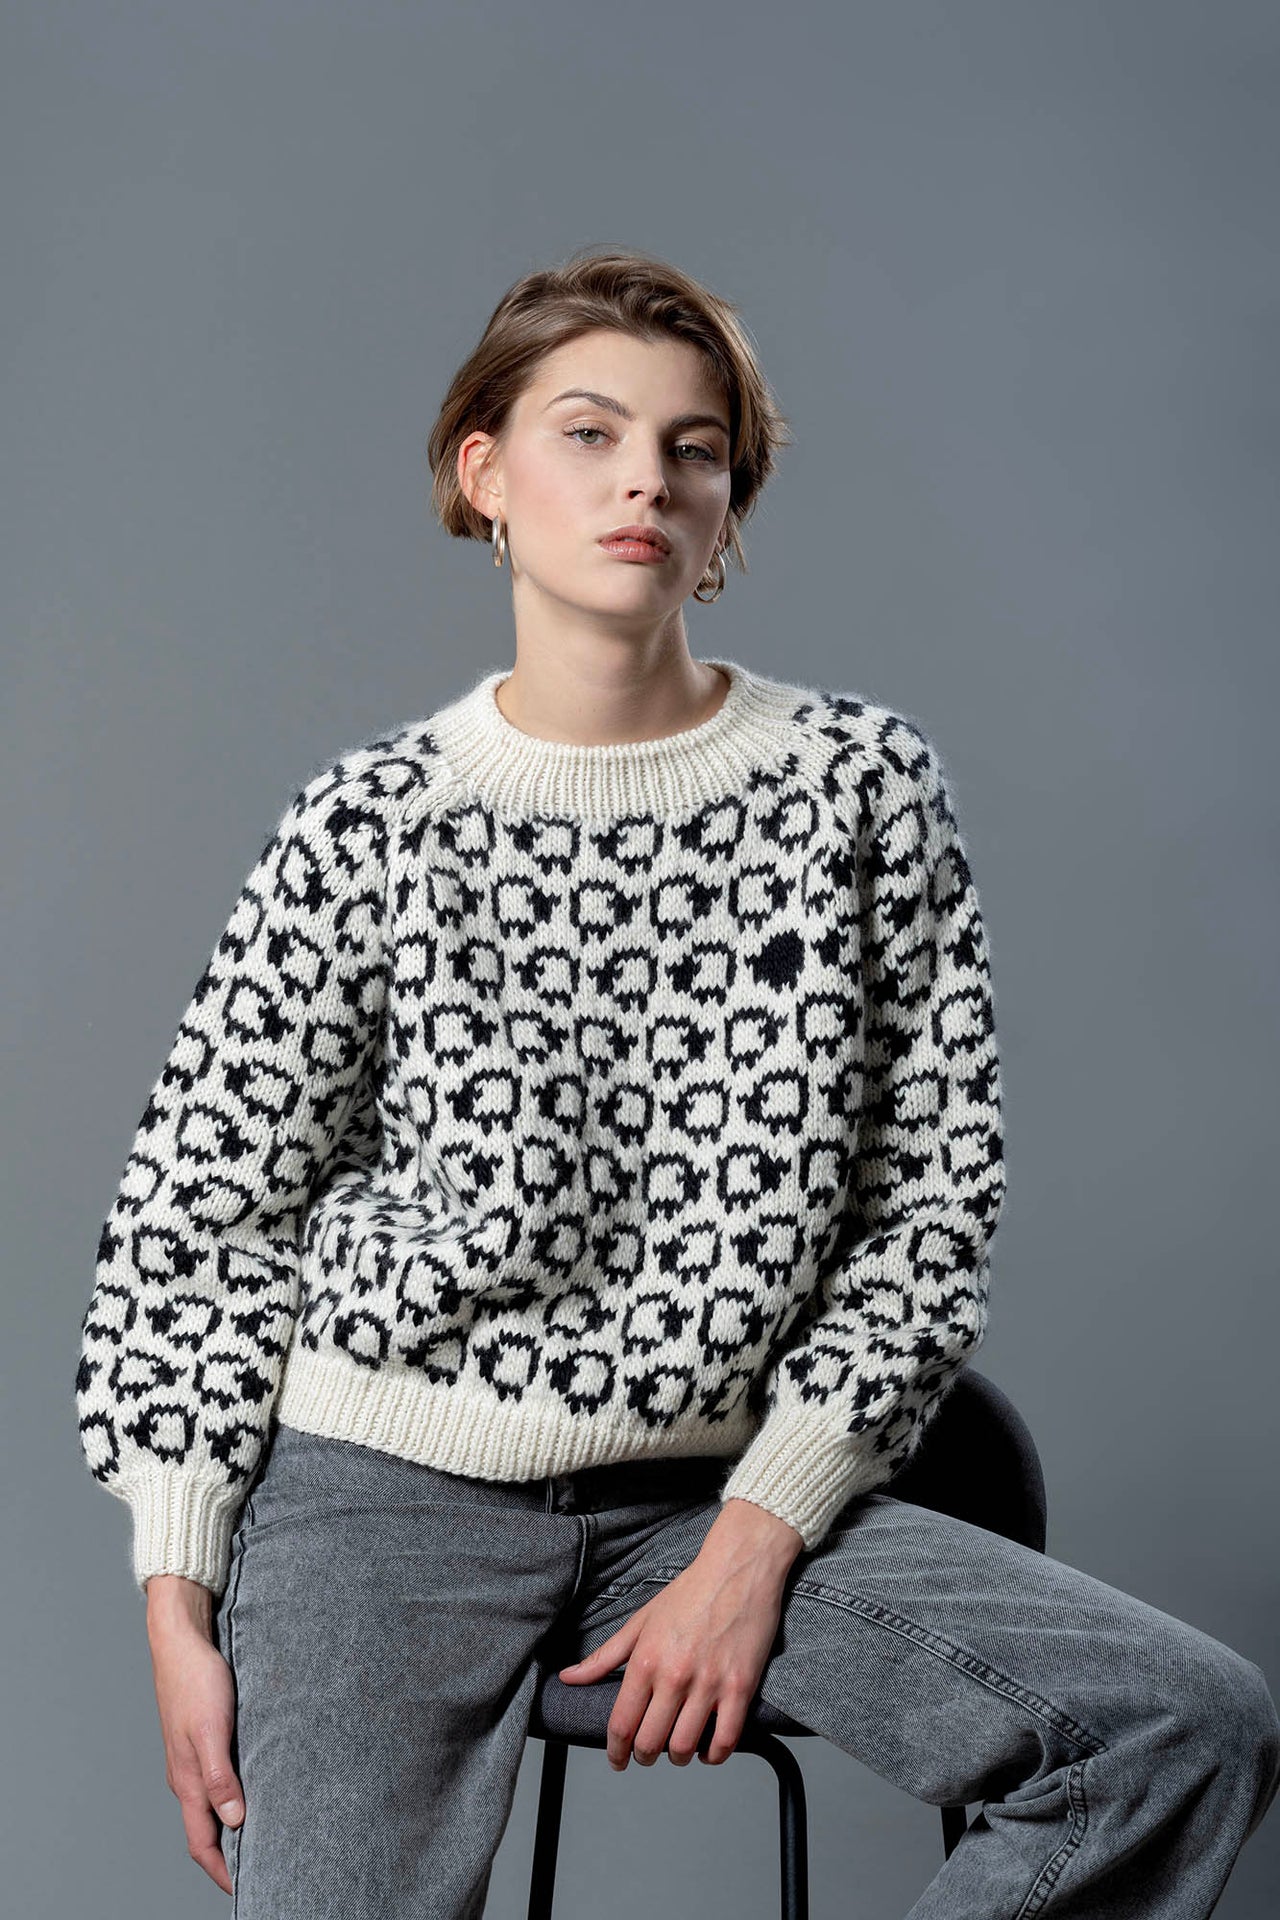 Handmade wool sweater with cropped cut and puffed sleeves. On the sweater is a herd of white sheep going all around, a single black sheep is on the front top left of the sweater. 